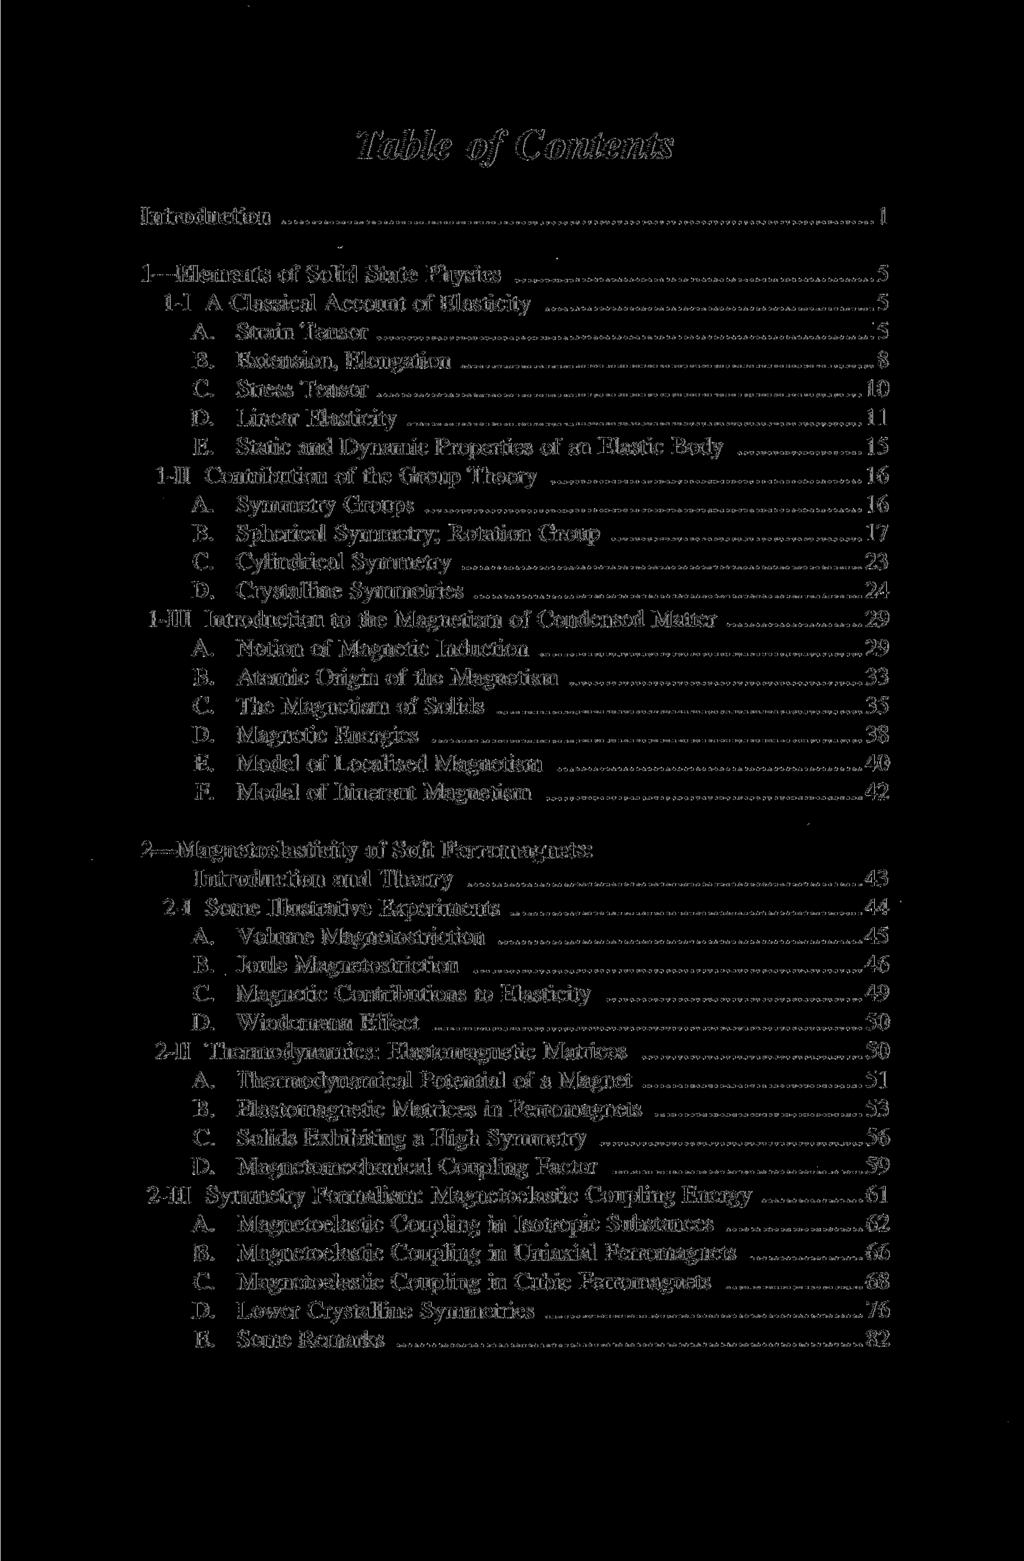 Table of Contents Introduction 1 1 Elements of Solid State Physics 5 1-1 A Classical Account of Elasticity 5 A. Strain Tensor 5 B. Extension, Elongation 8 C. Stress Tensor 10 D.